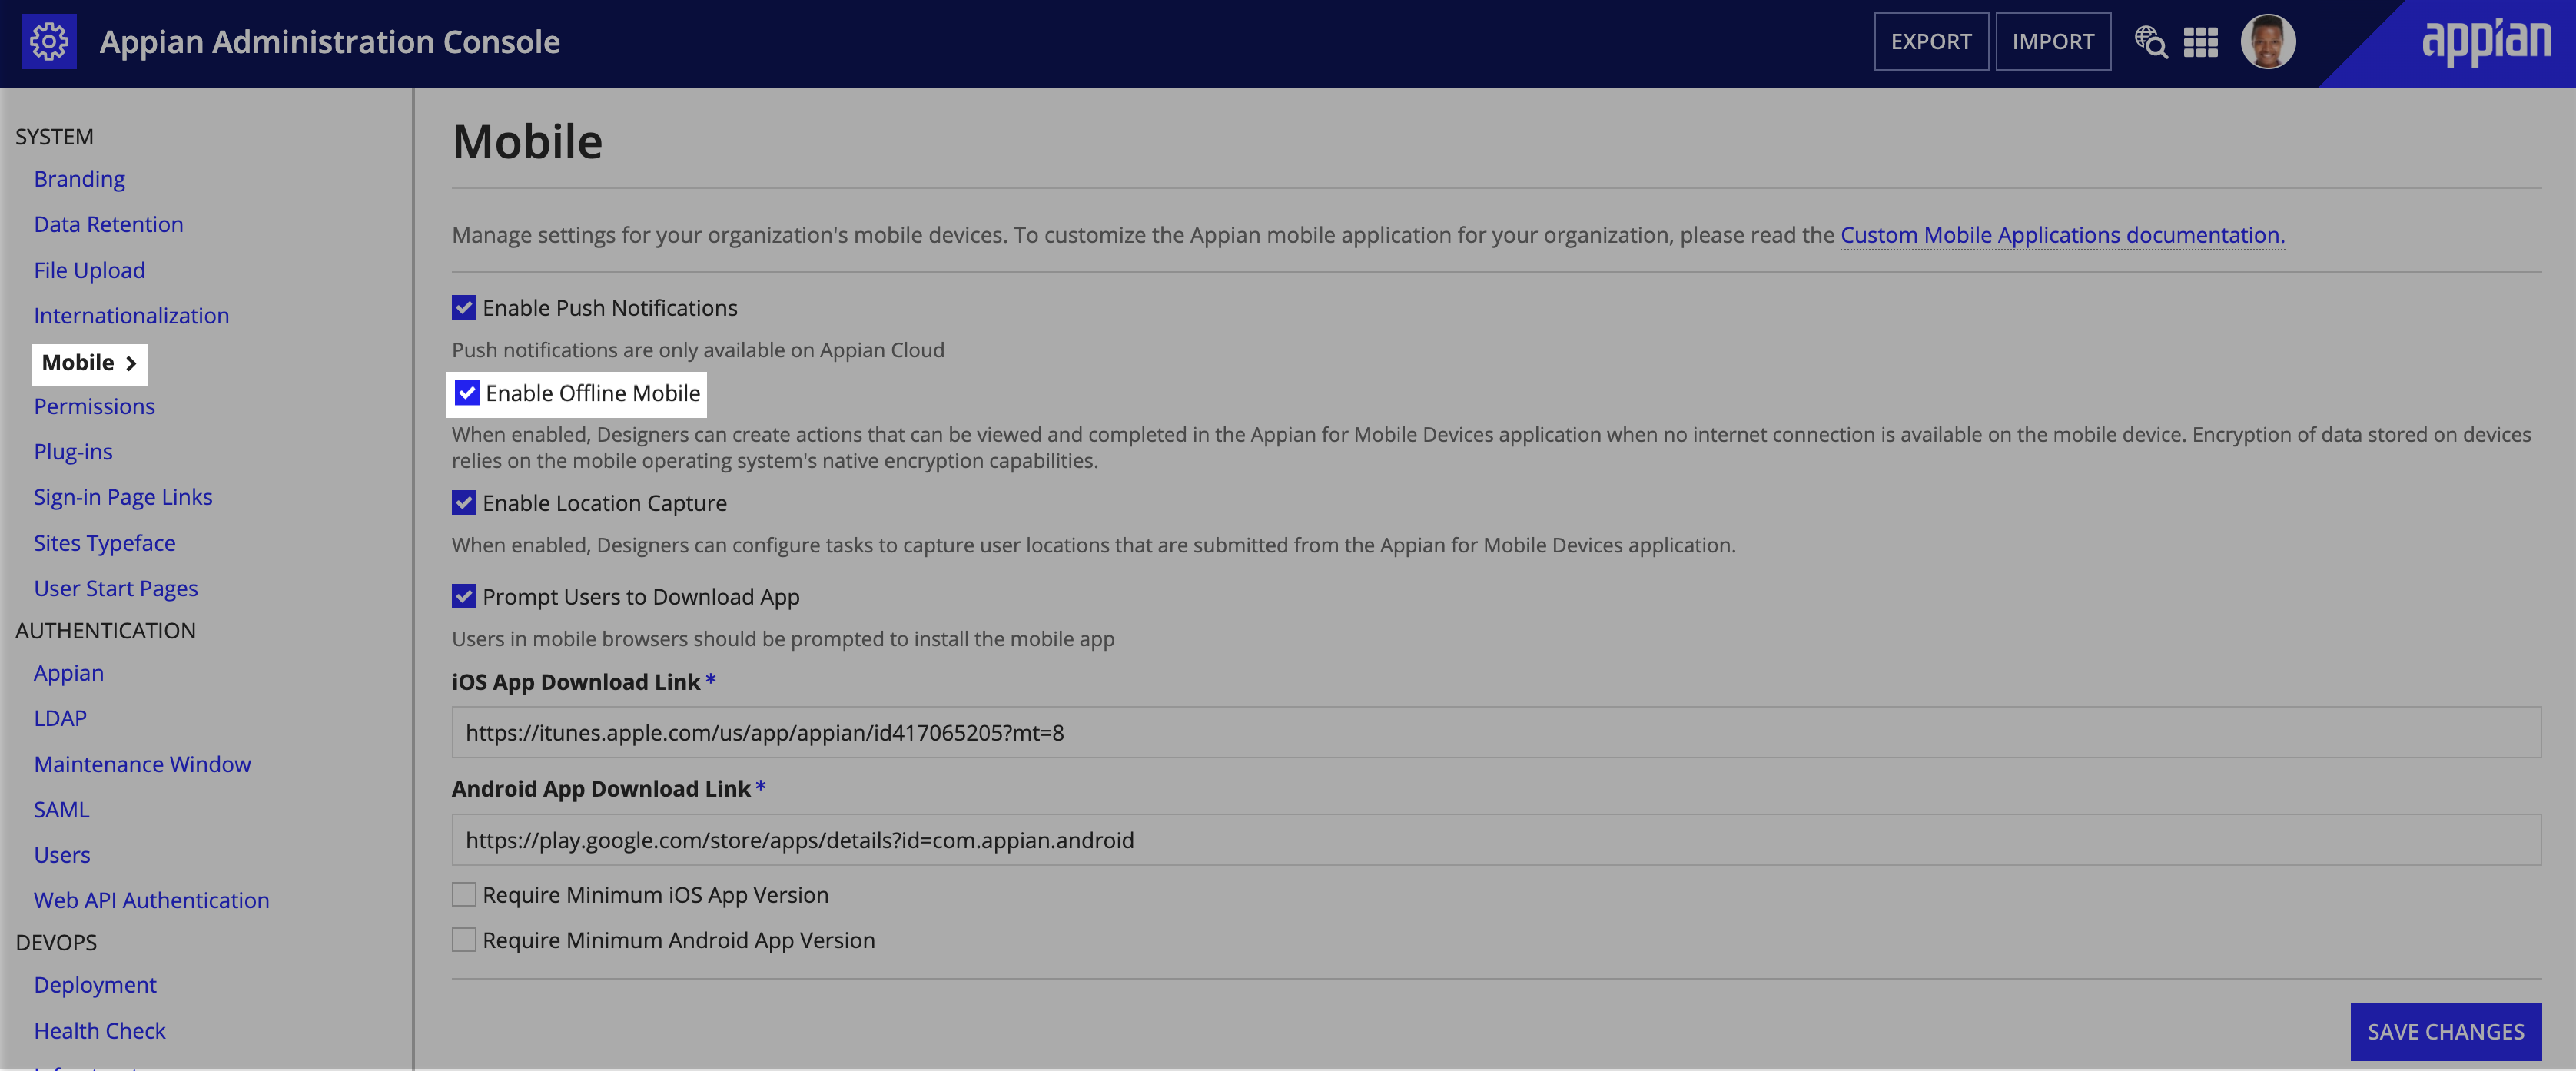 screenshot of the mobile tab in the Admin Console